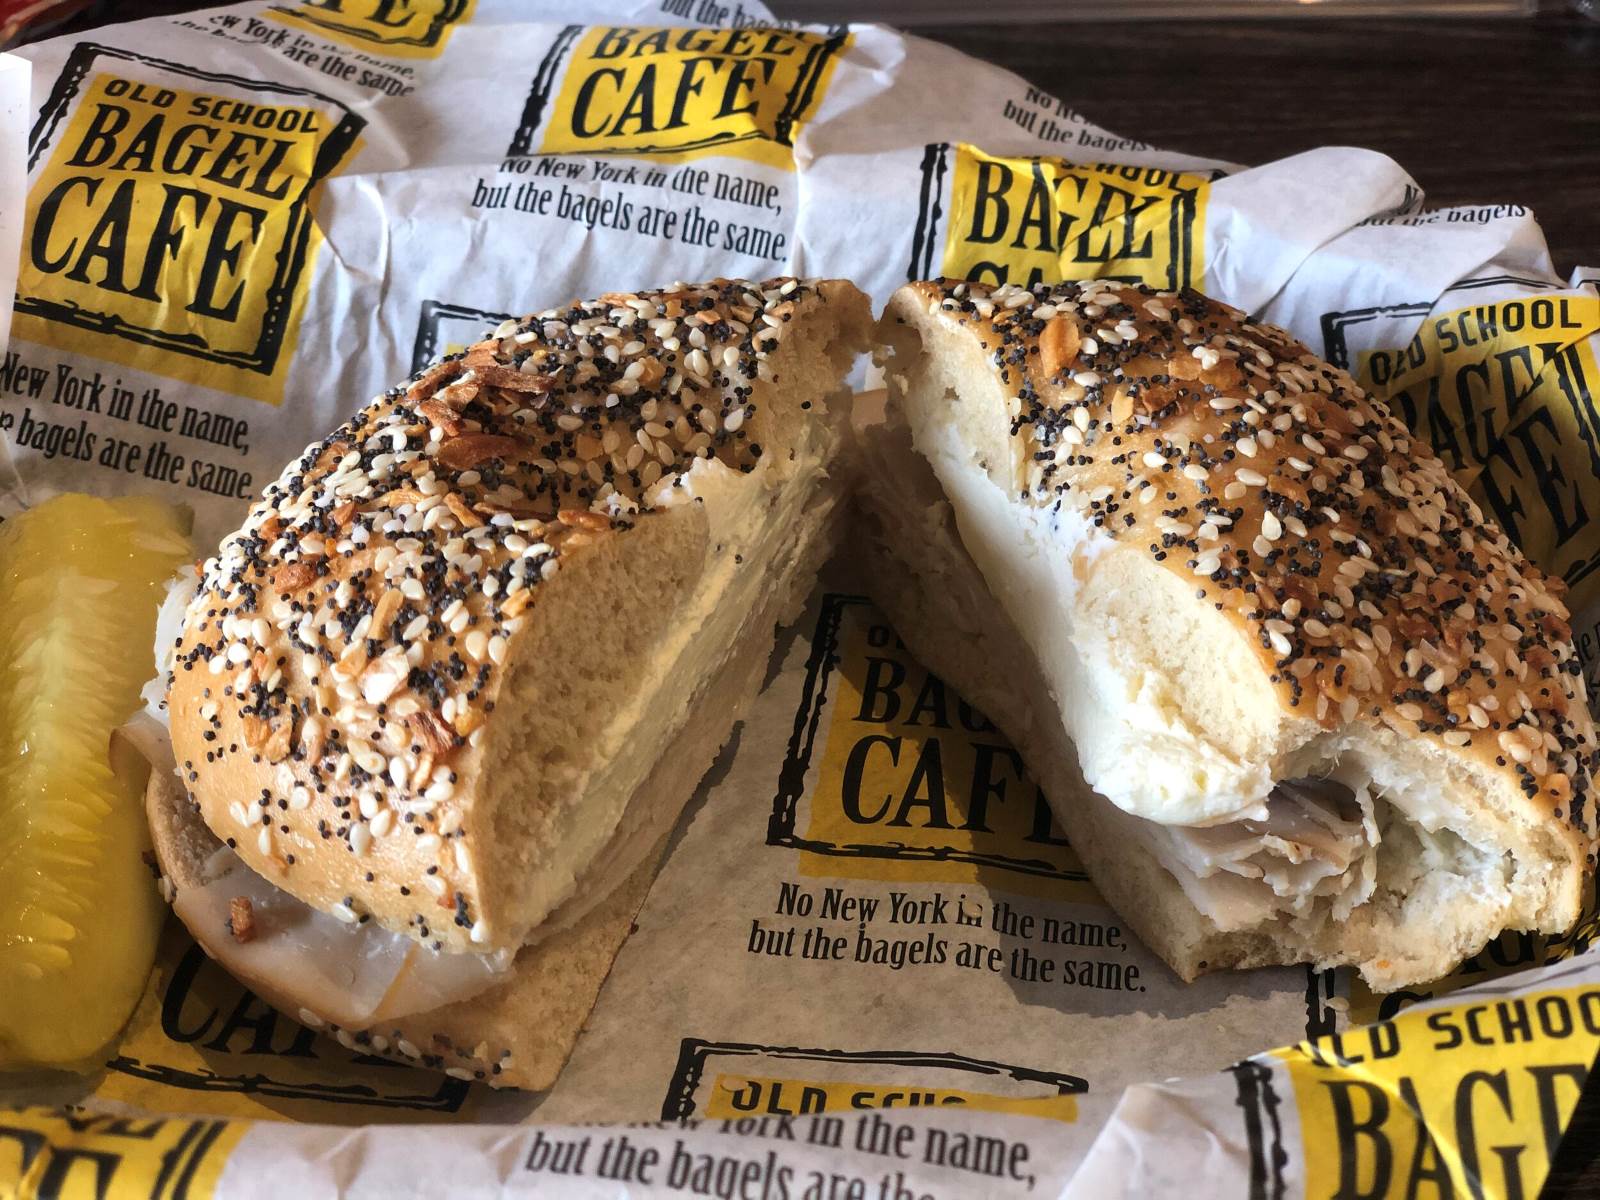 18-old-school-bagel-cafe-nutrition-facts